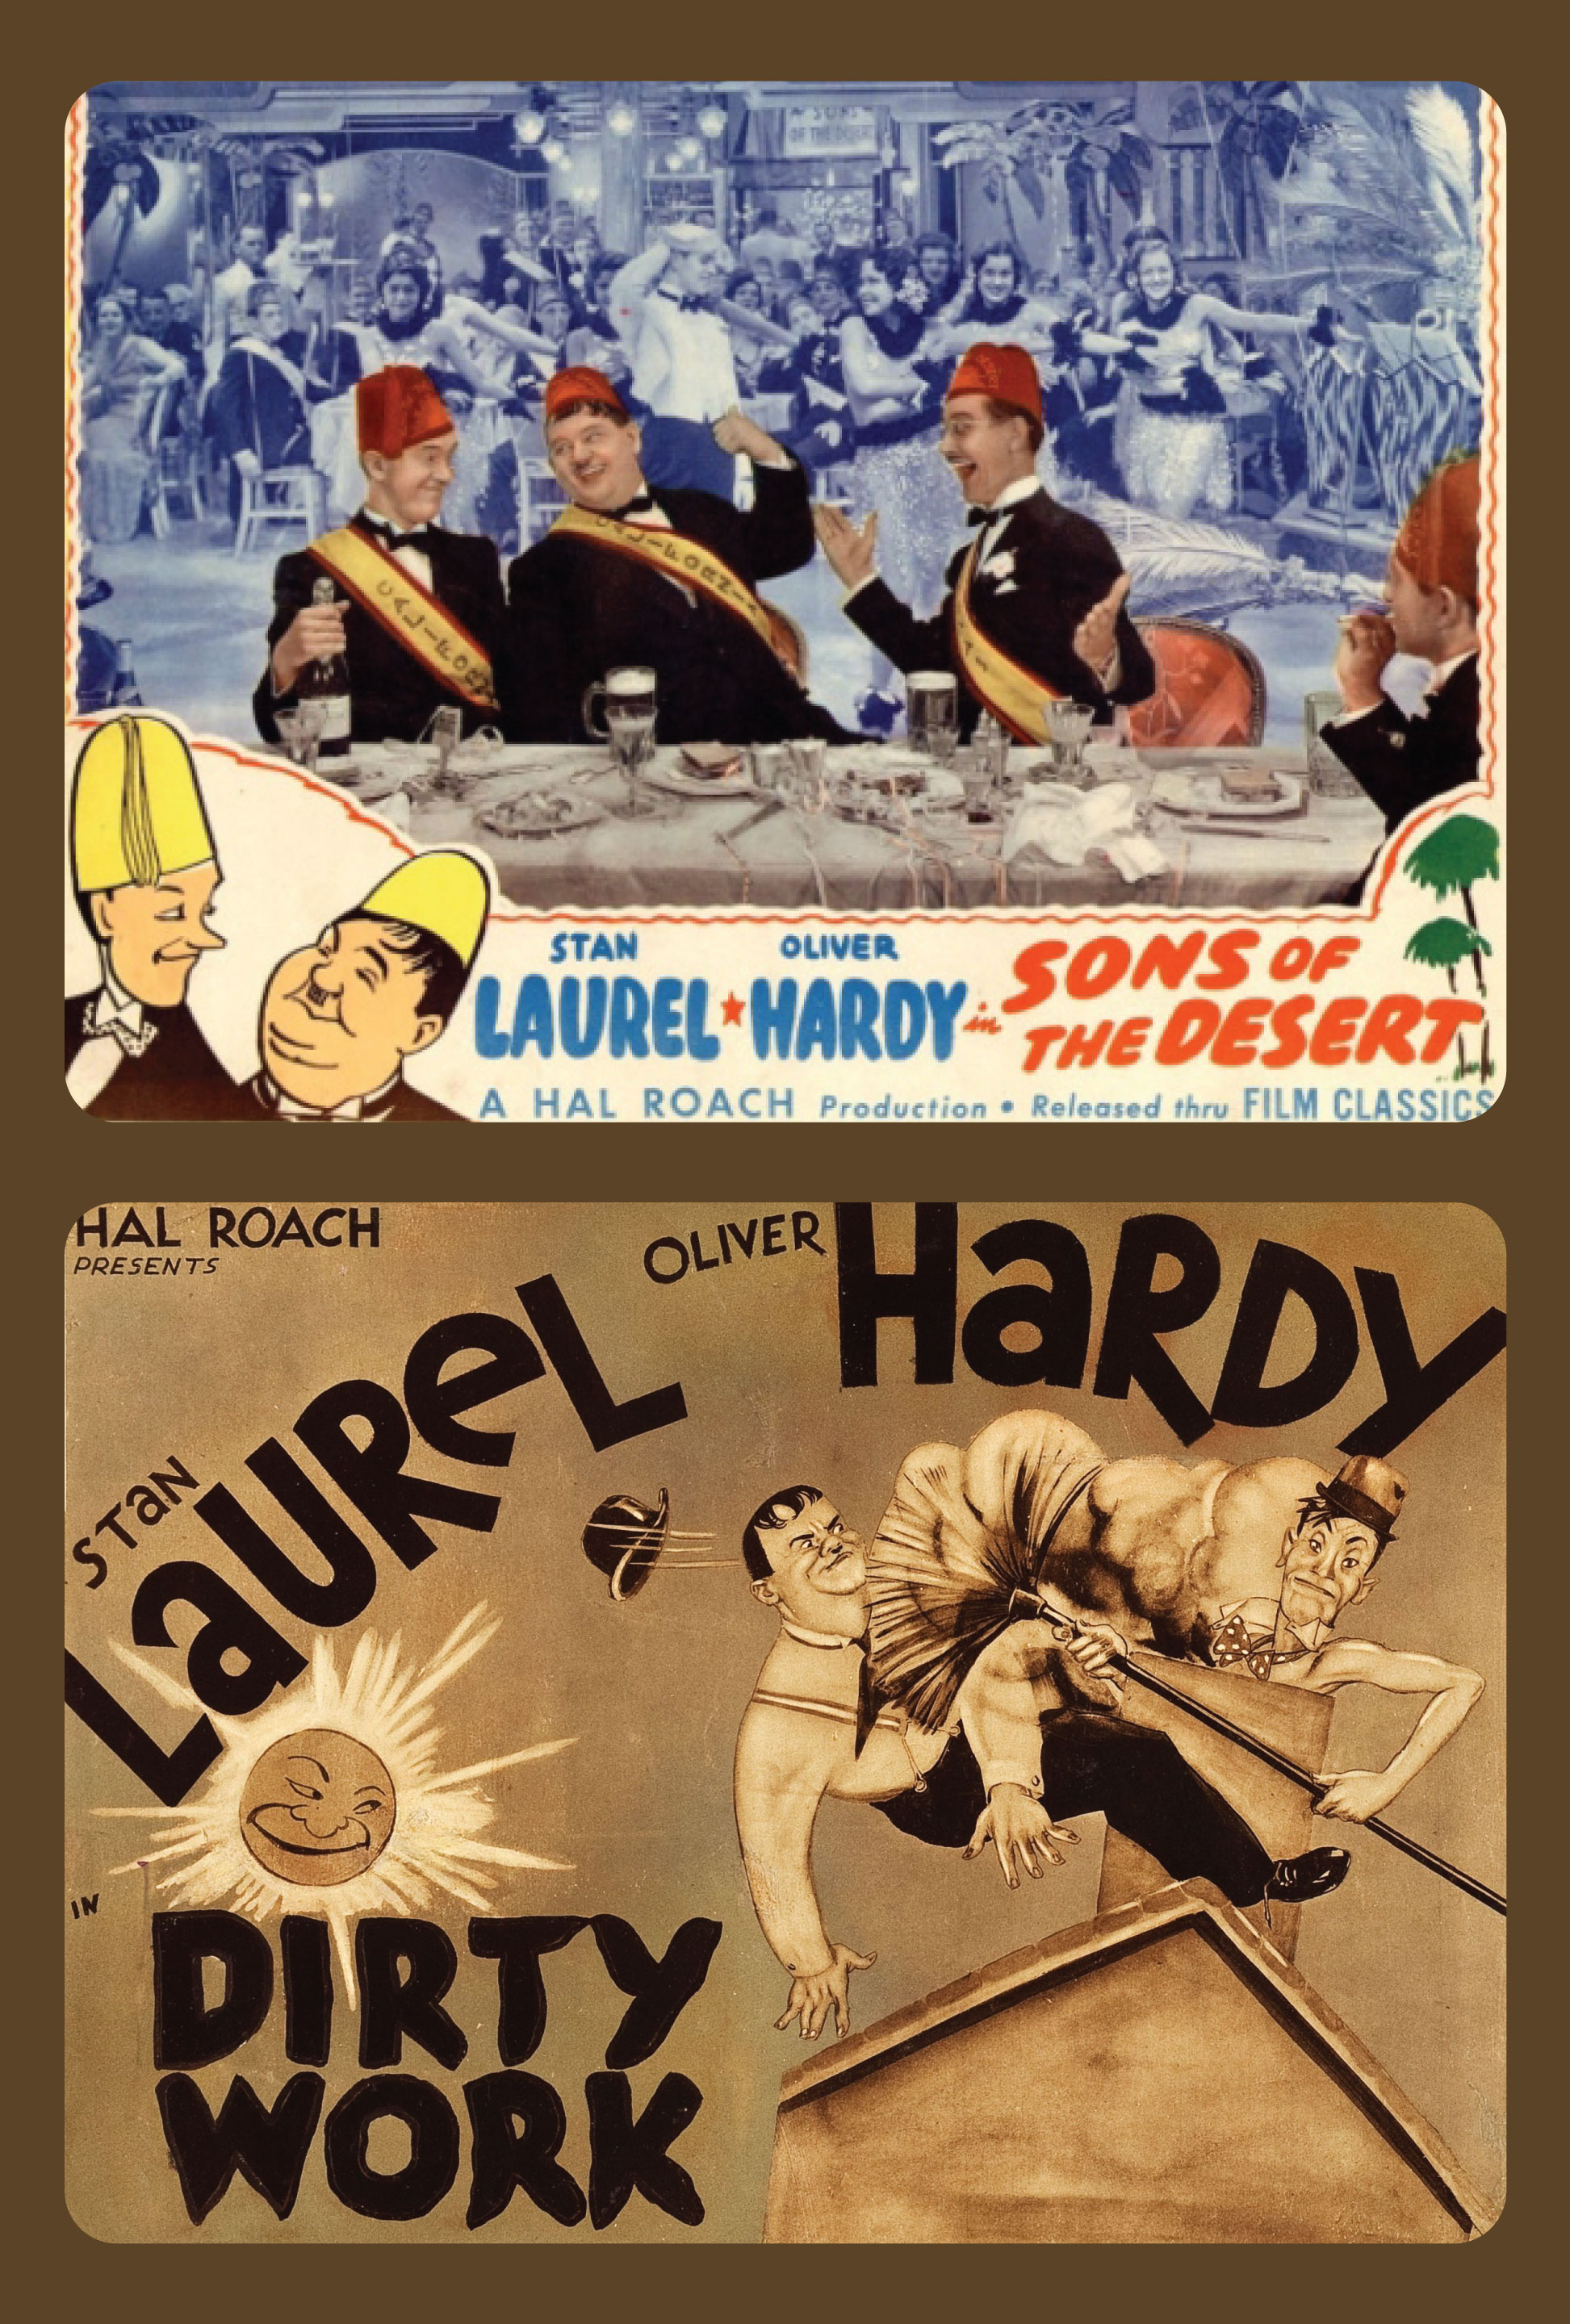 Laurel & Hardy: Sons Of The Desert and Dirty Work Poster